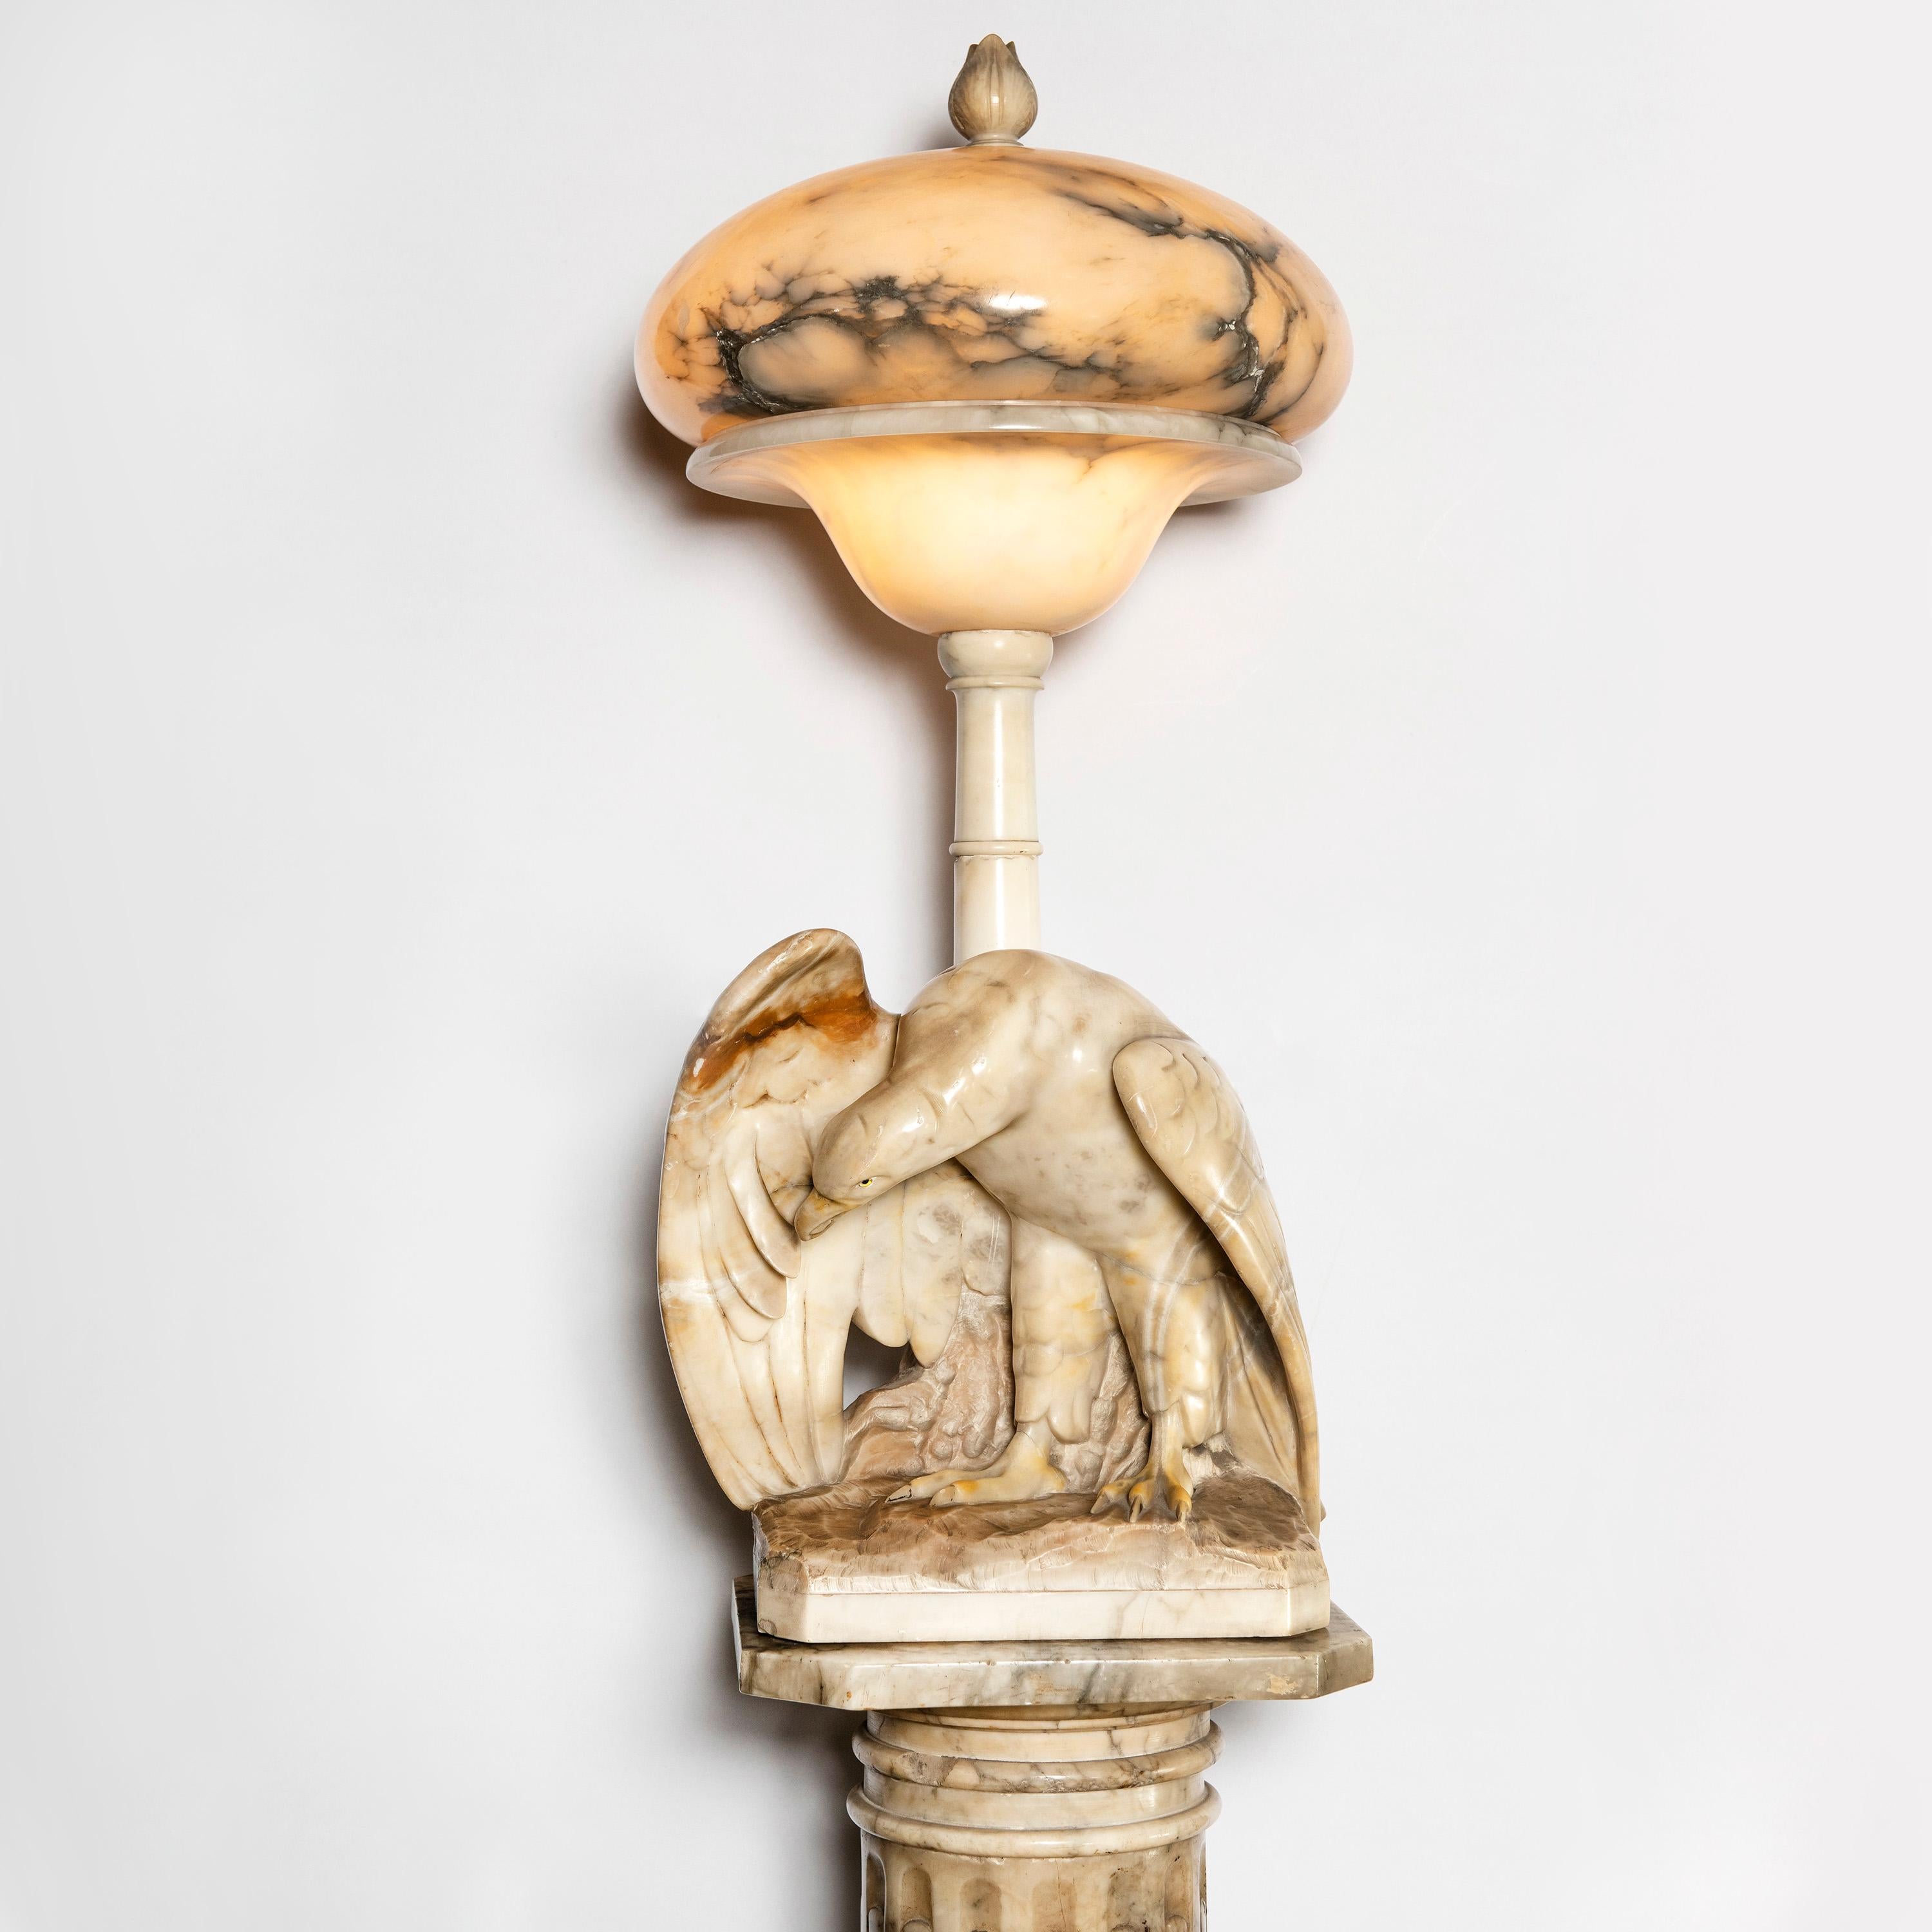 Alabaster lamp with eagle and base. Art Deco period. Italy, early 20th century.

Alabaster sculpture dimensions: 40 cm depth x 35 cm width x 84 cm height.
Alabaster pedestal dimensions: 35 cm diameter x 108 cm height.